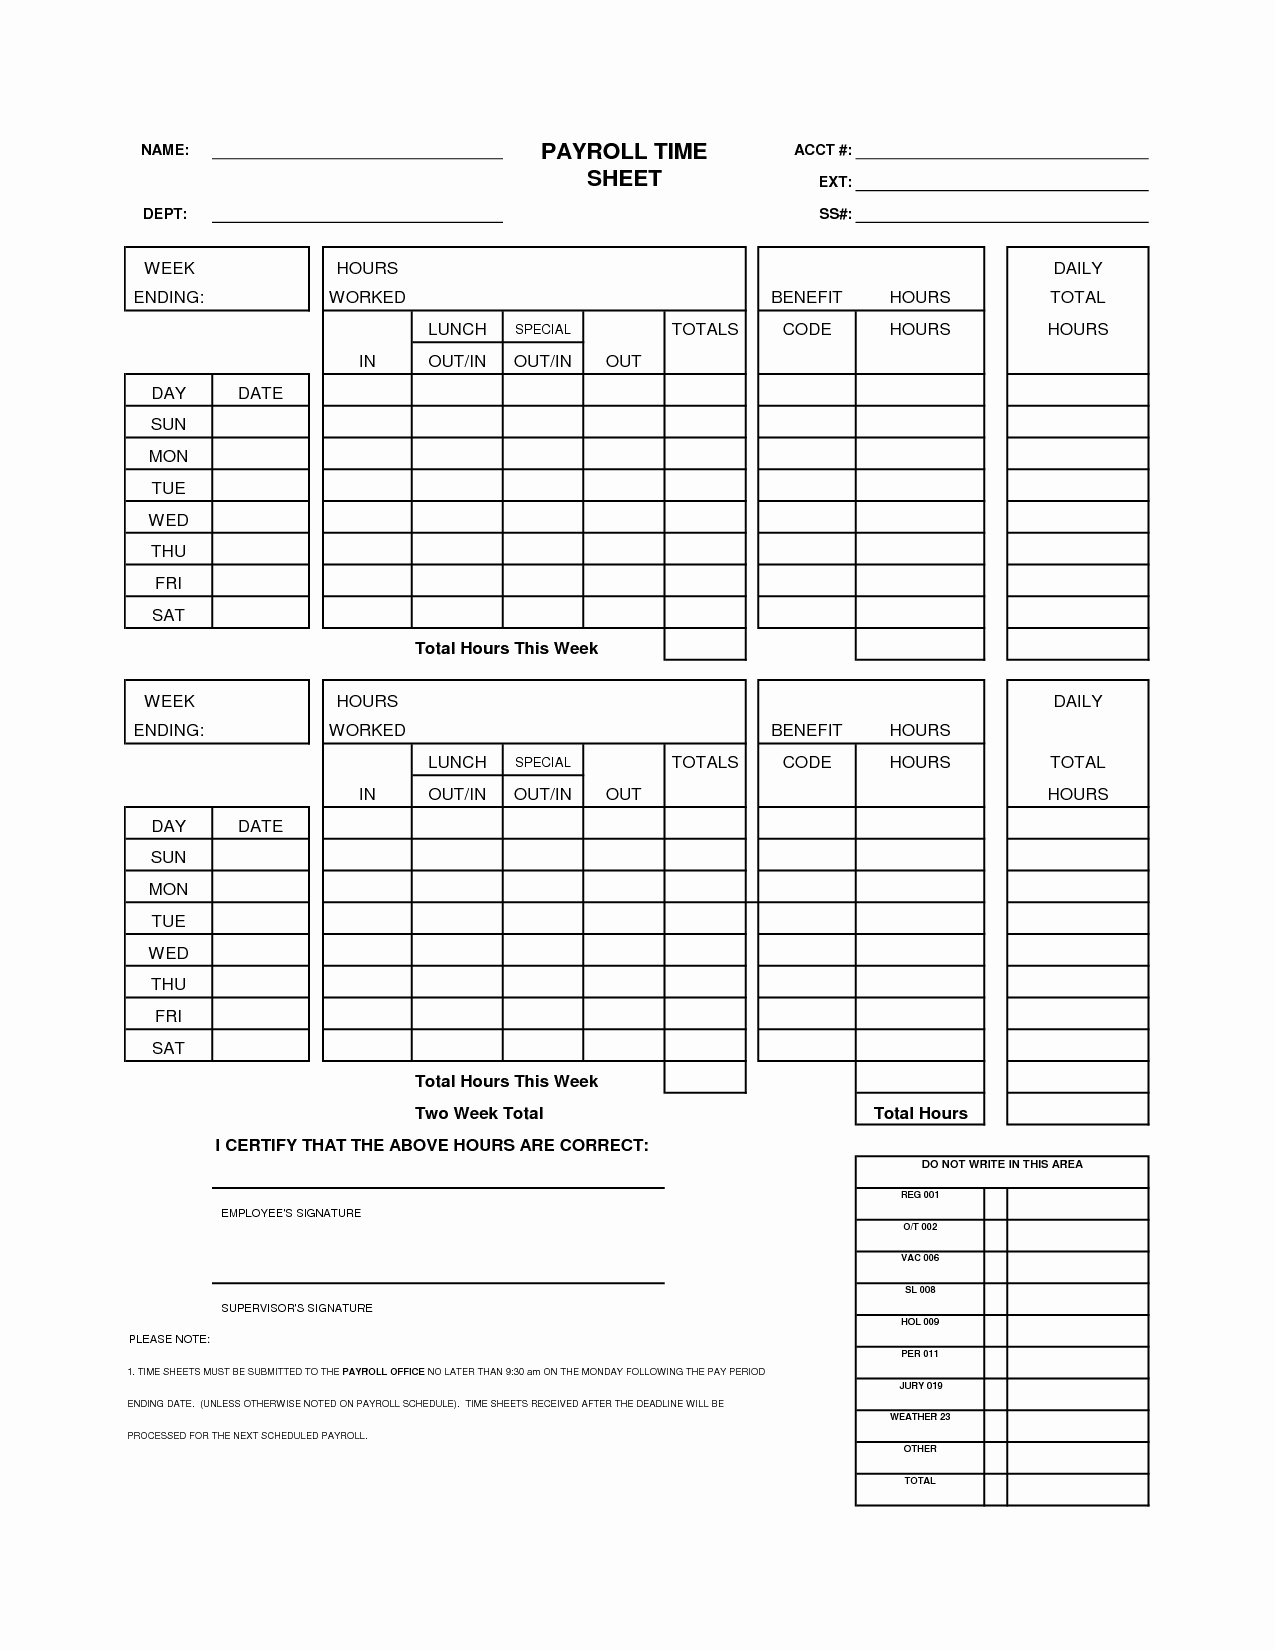 Employee Lunch Schedule Template Unique Timesheet Template with Lunch Break